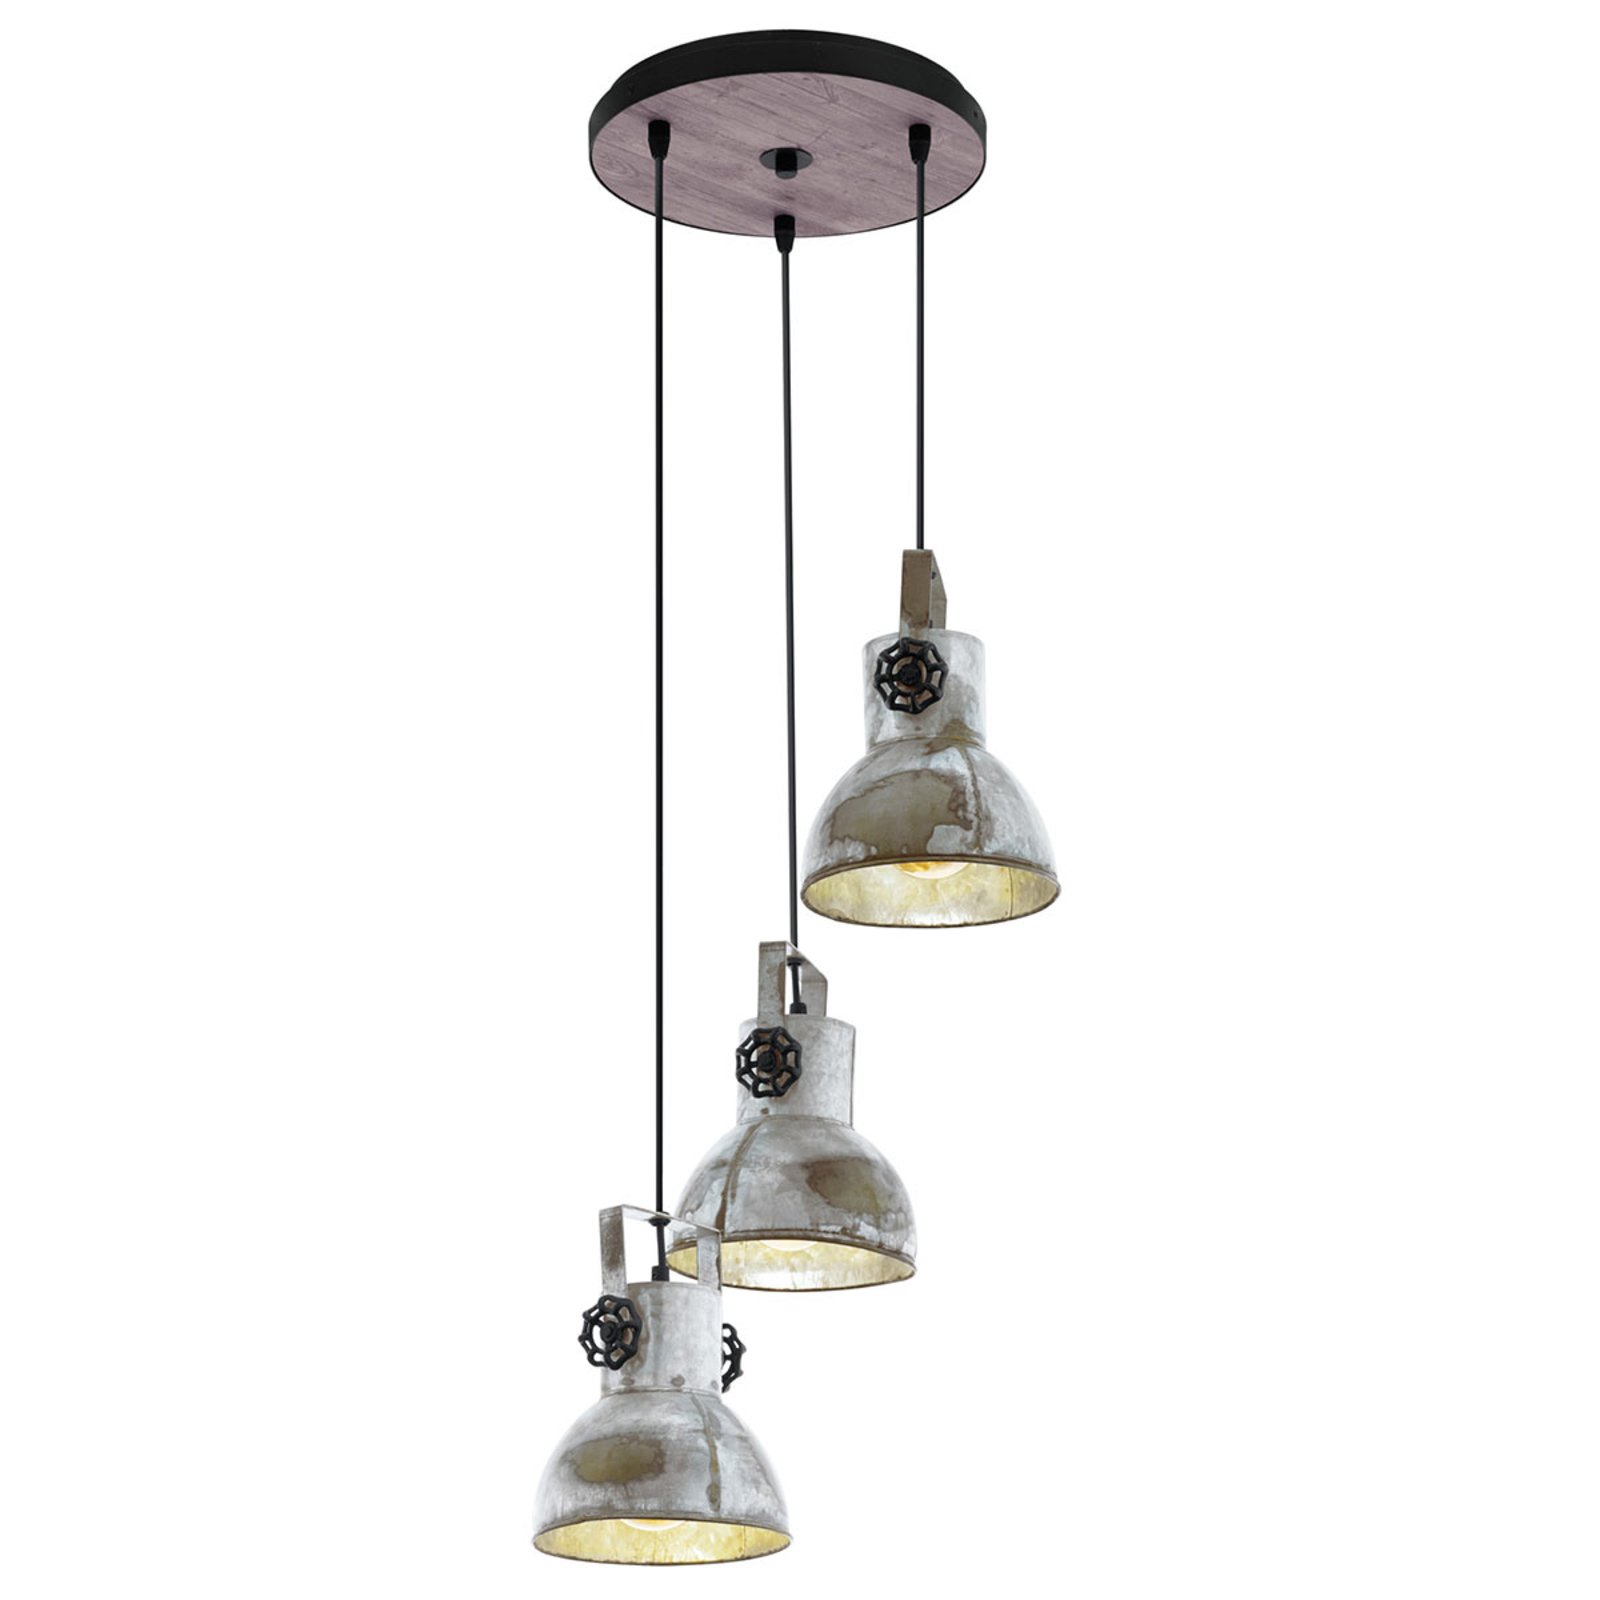 Barnstaple hanging lamp with an industrial design